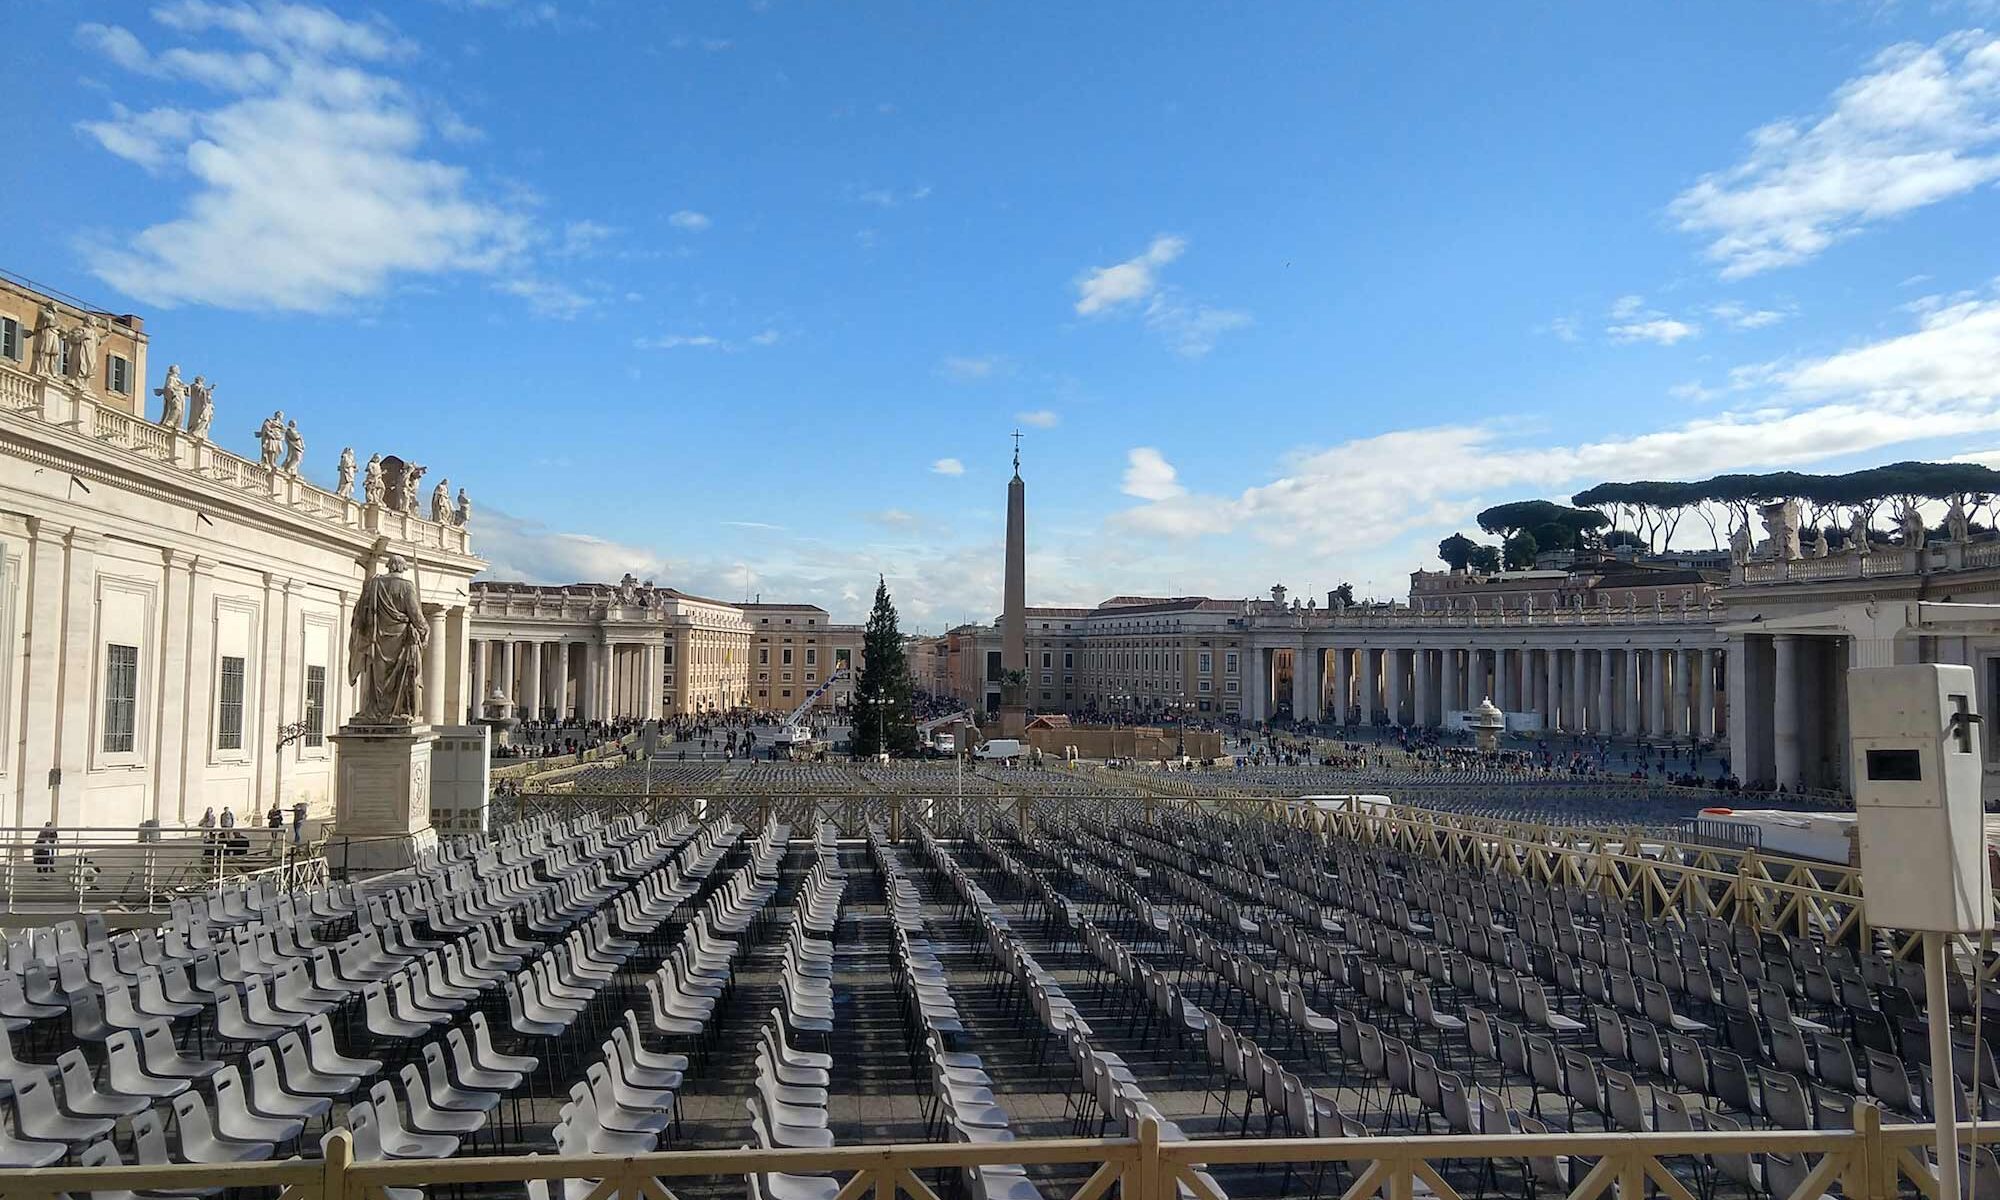 Vatican City with Chairs Ready for Service December 2019